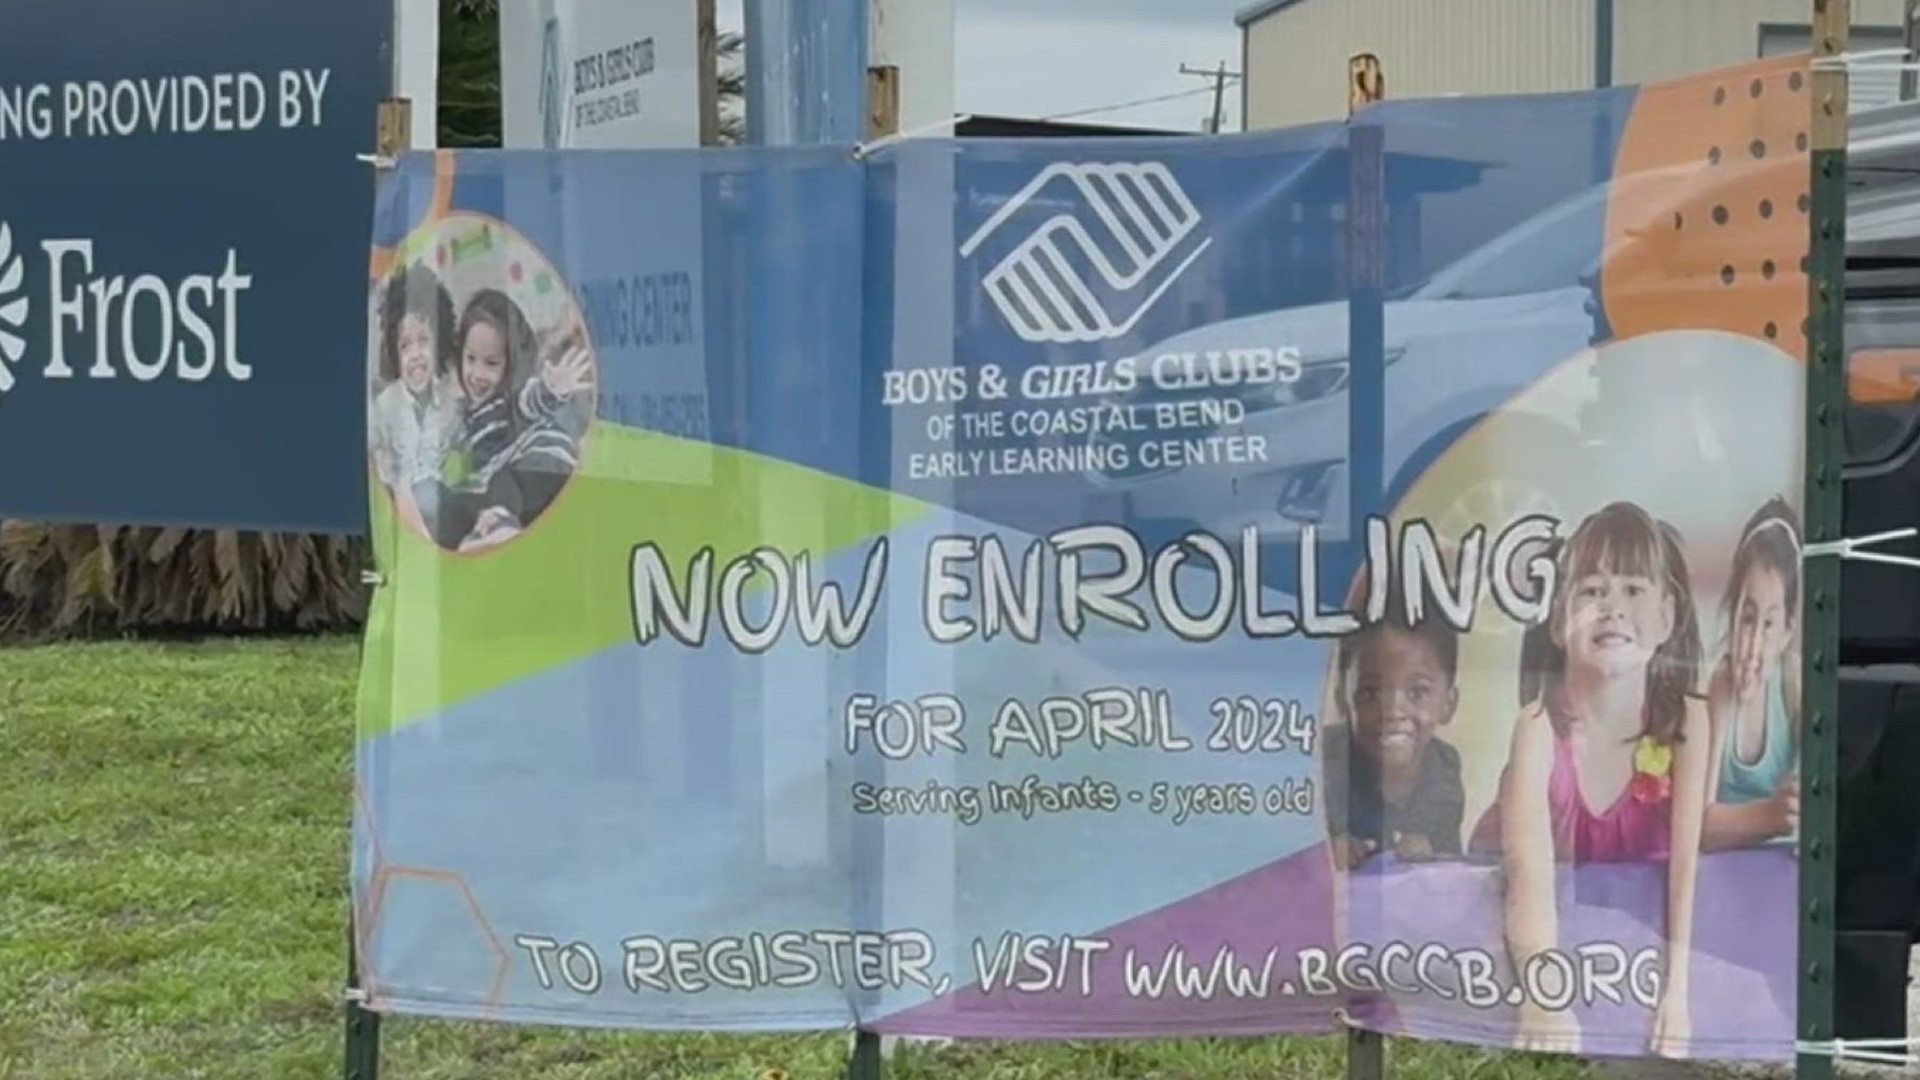 Enrollment for the new learning center is now open with classes starting as soon as April 2.